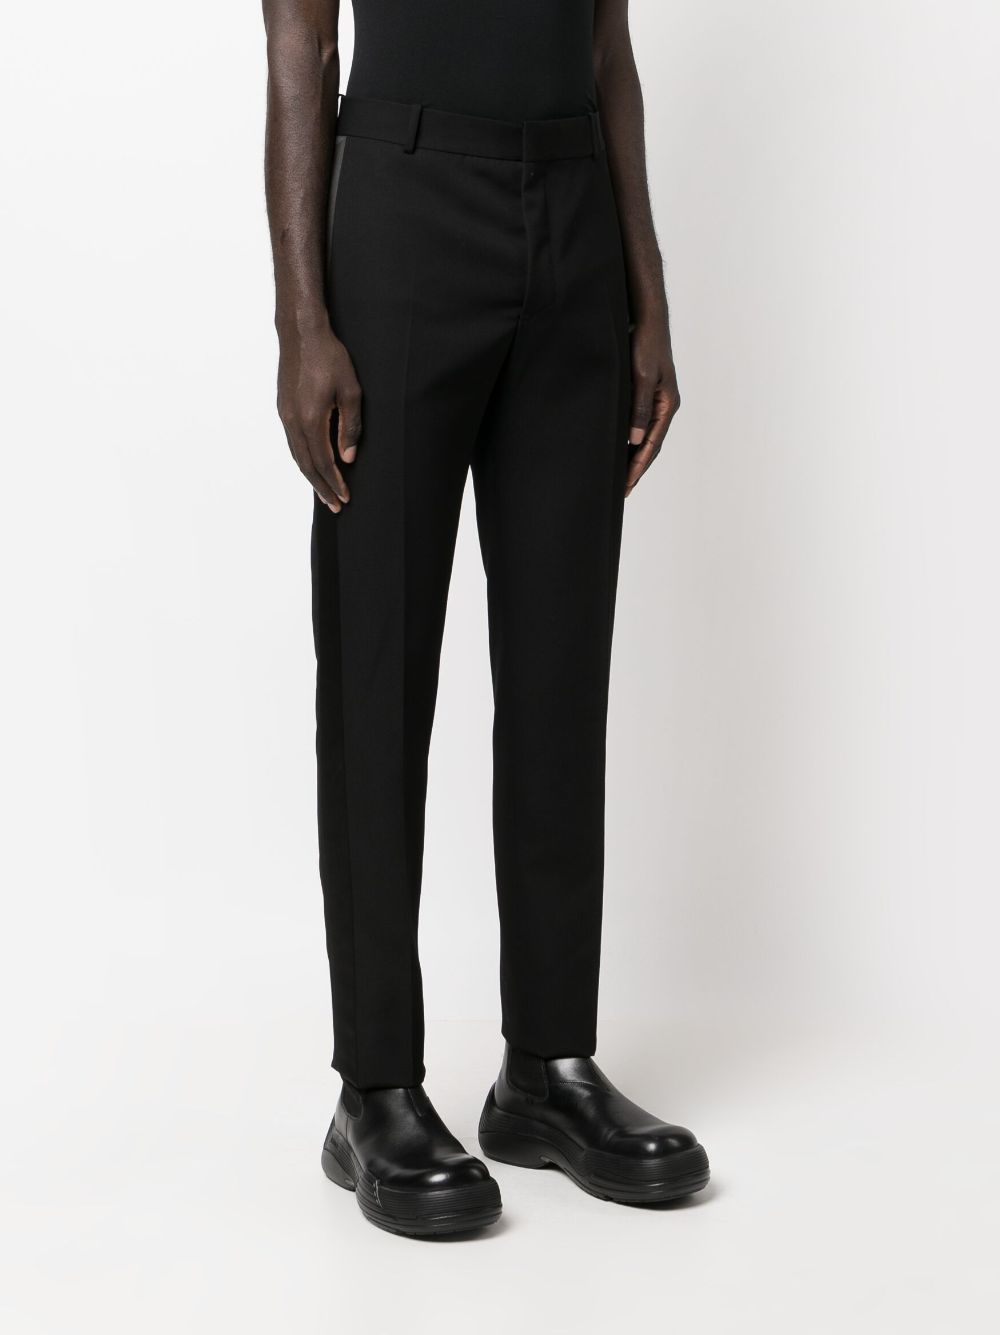 Shop Alexander Mcqueen Men's Black Wool Tailored Trousers With Satin Side Stripes